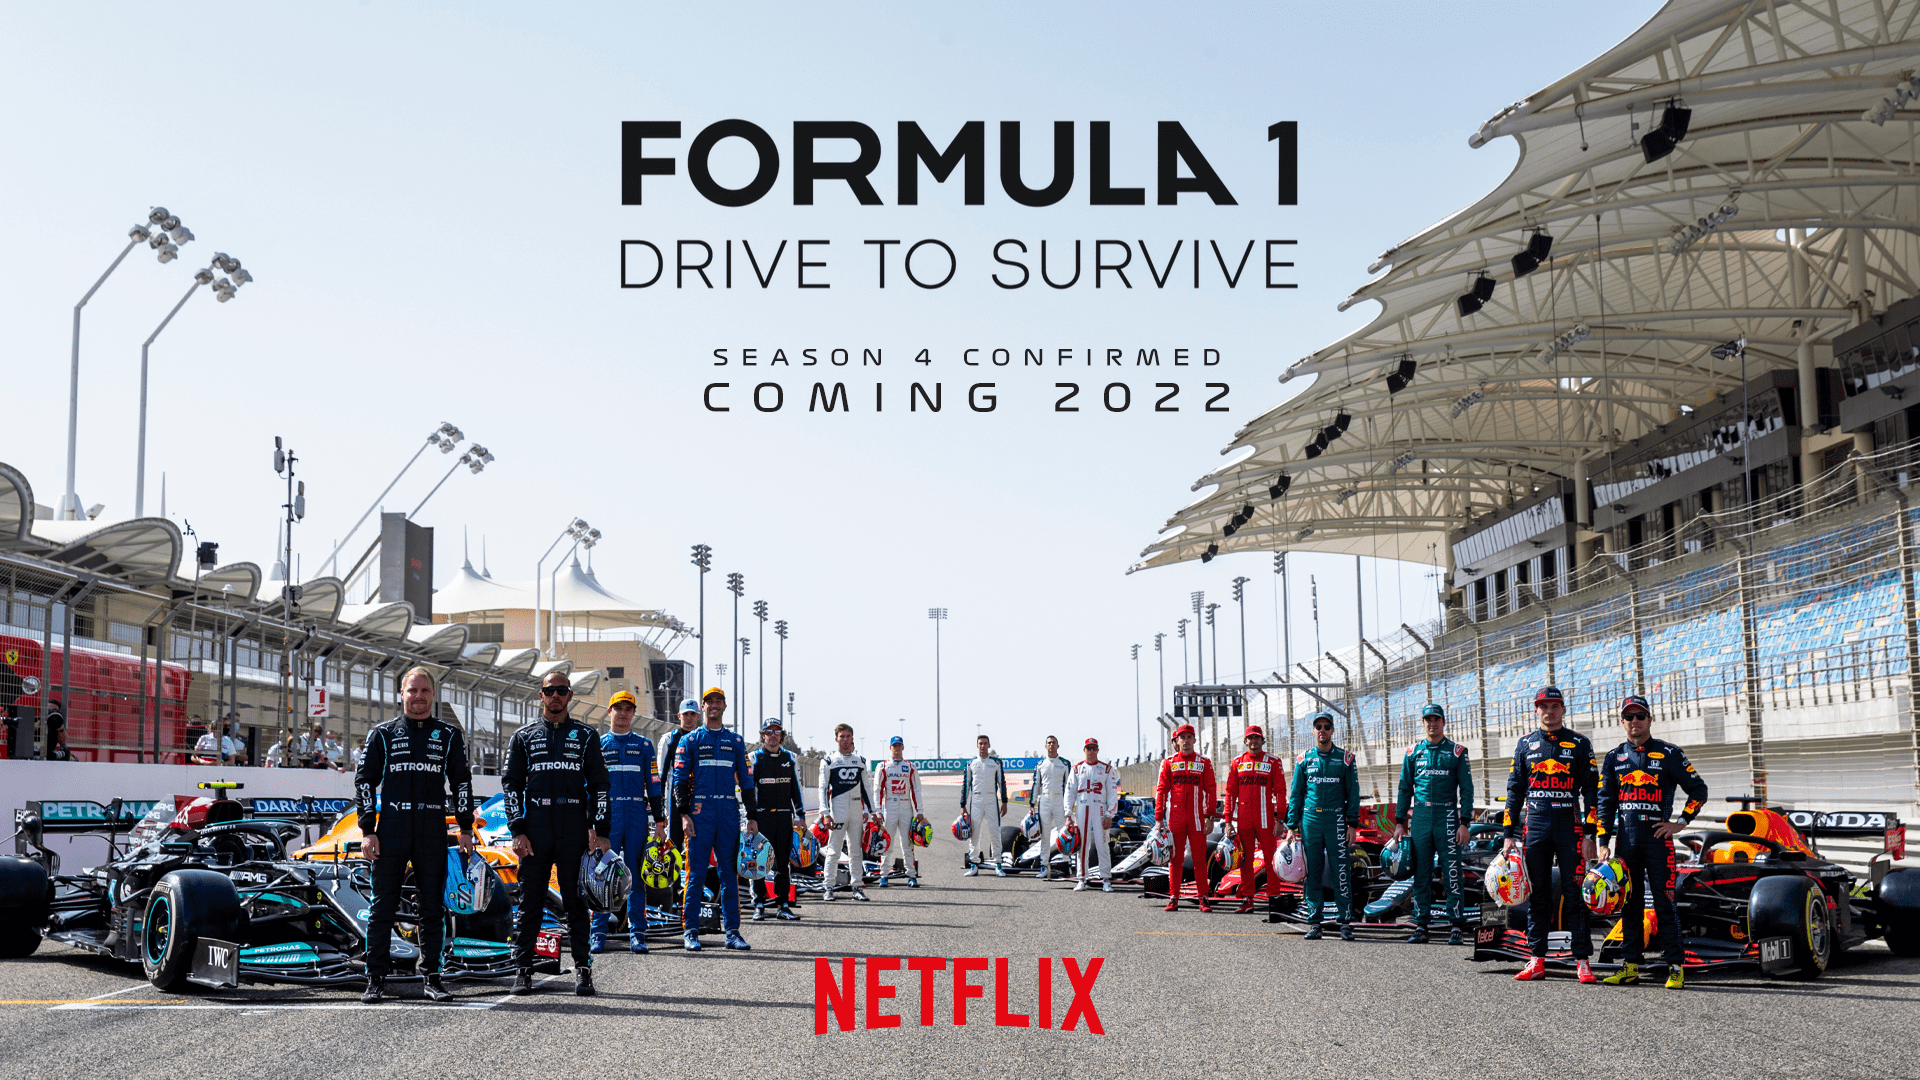 Season 4 of Drive To Survive coming to Netflix in 2022 Formula 1®